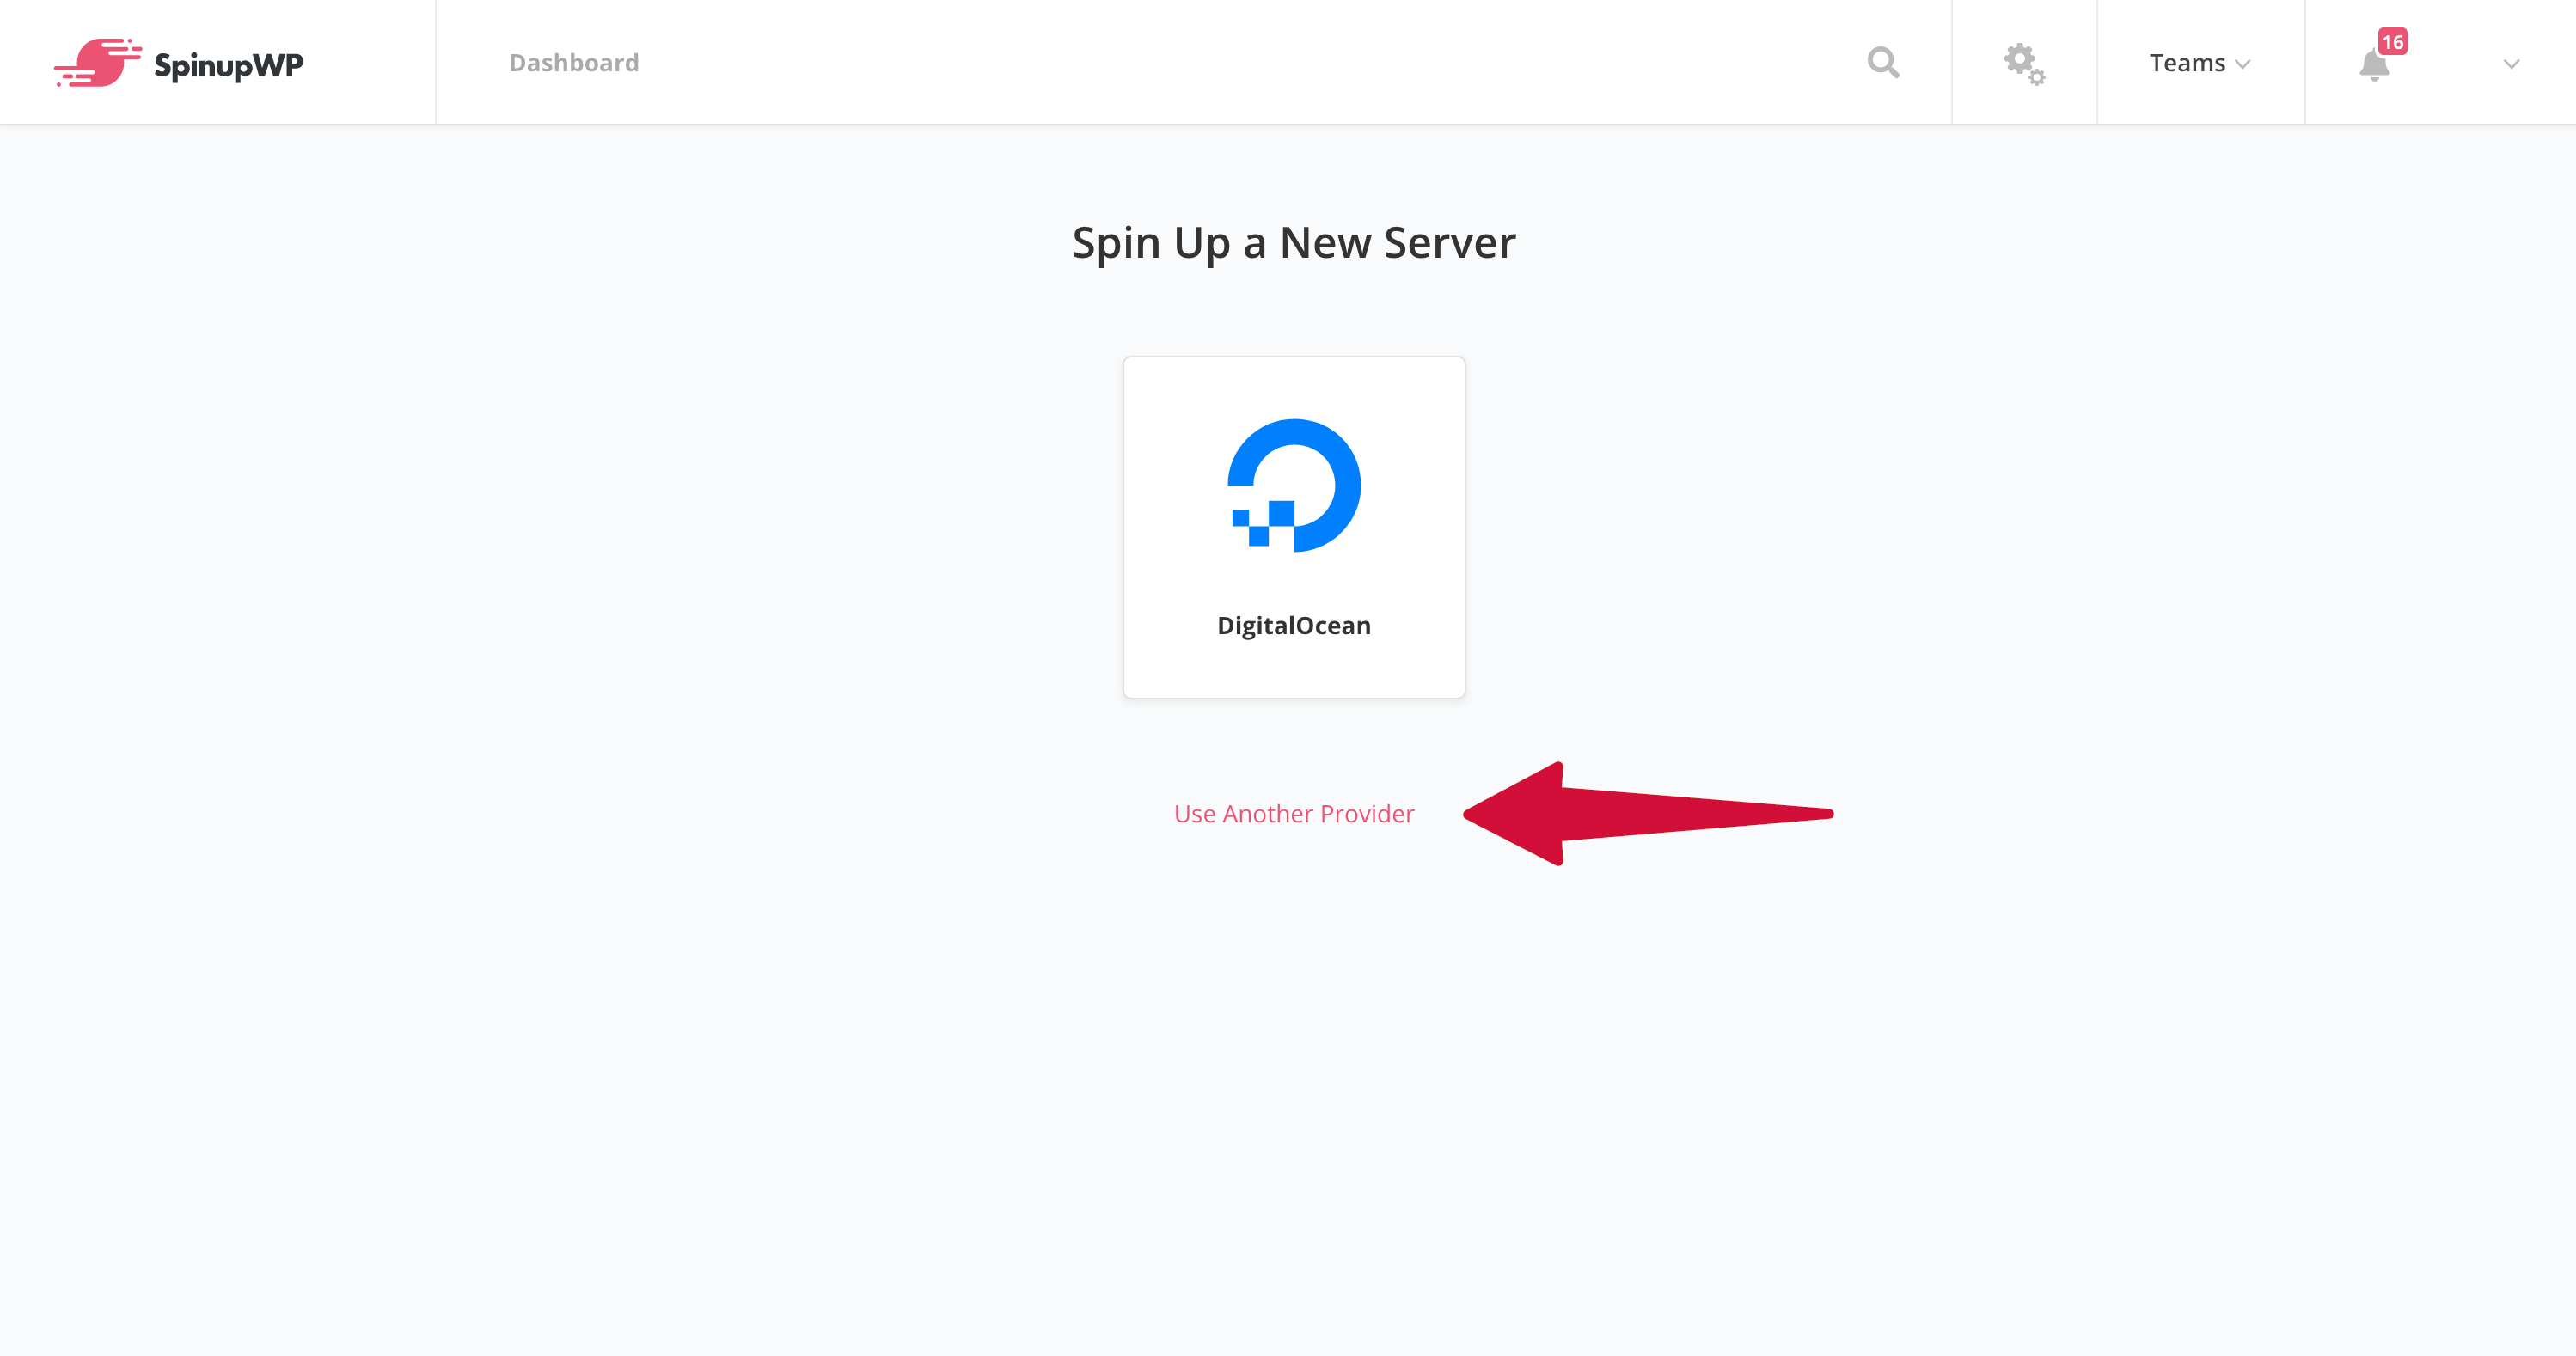 SpinupWP Spin up a new server